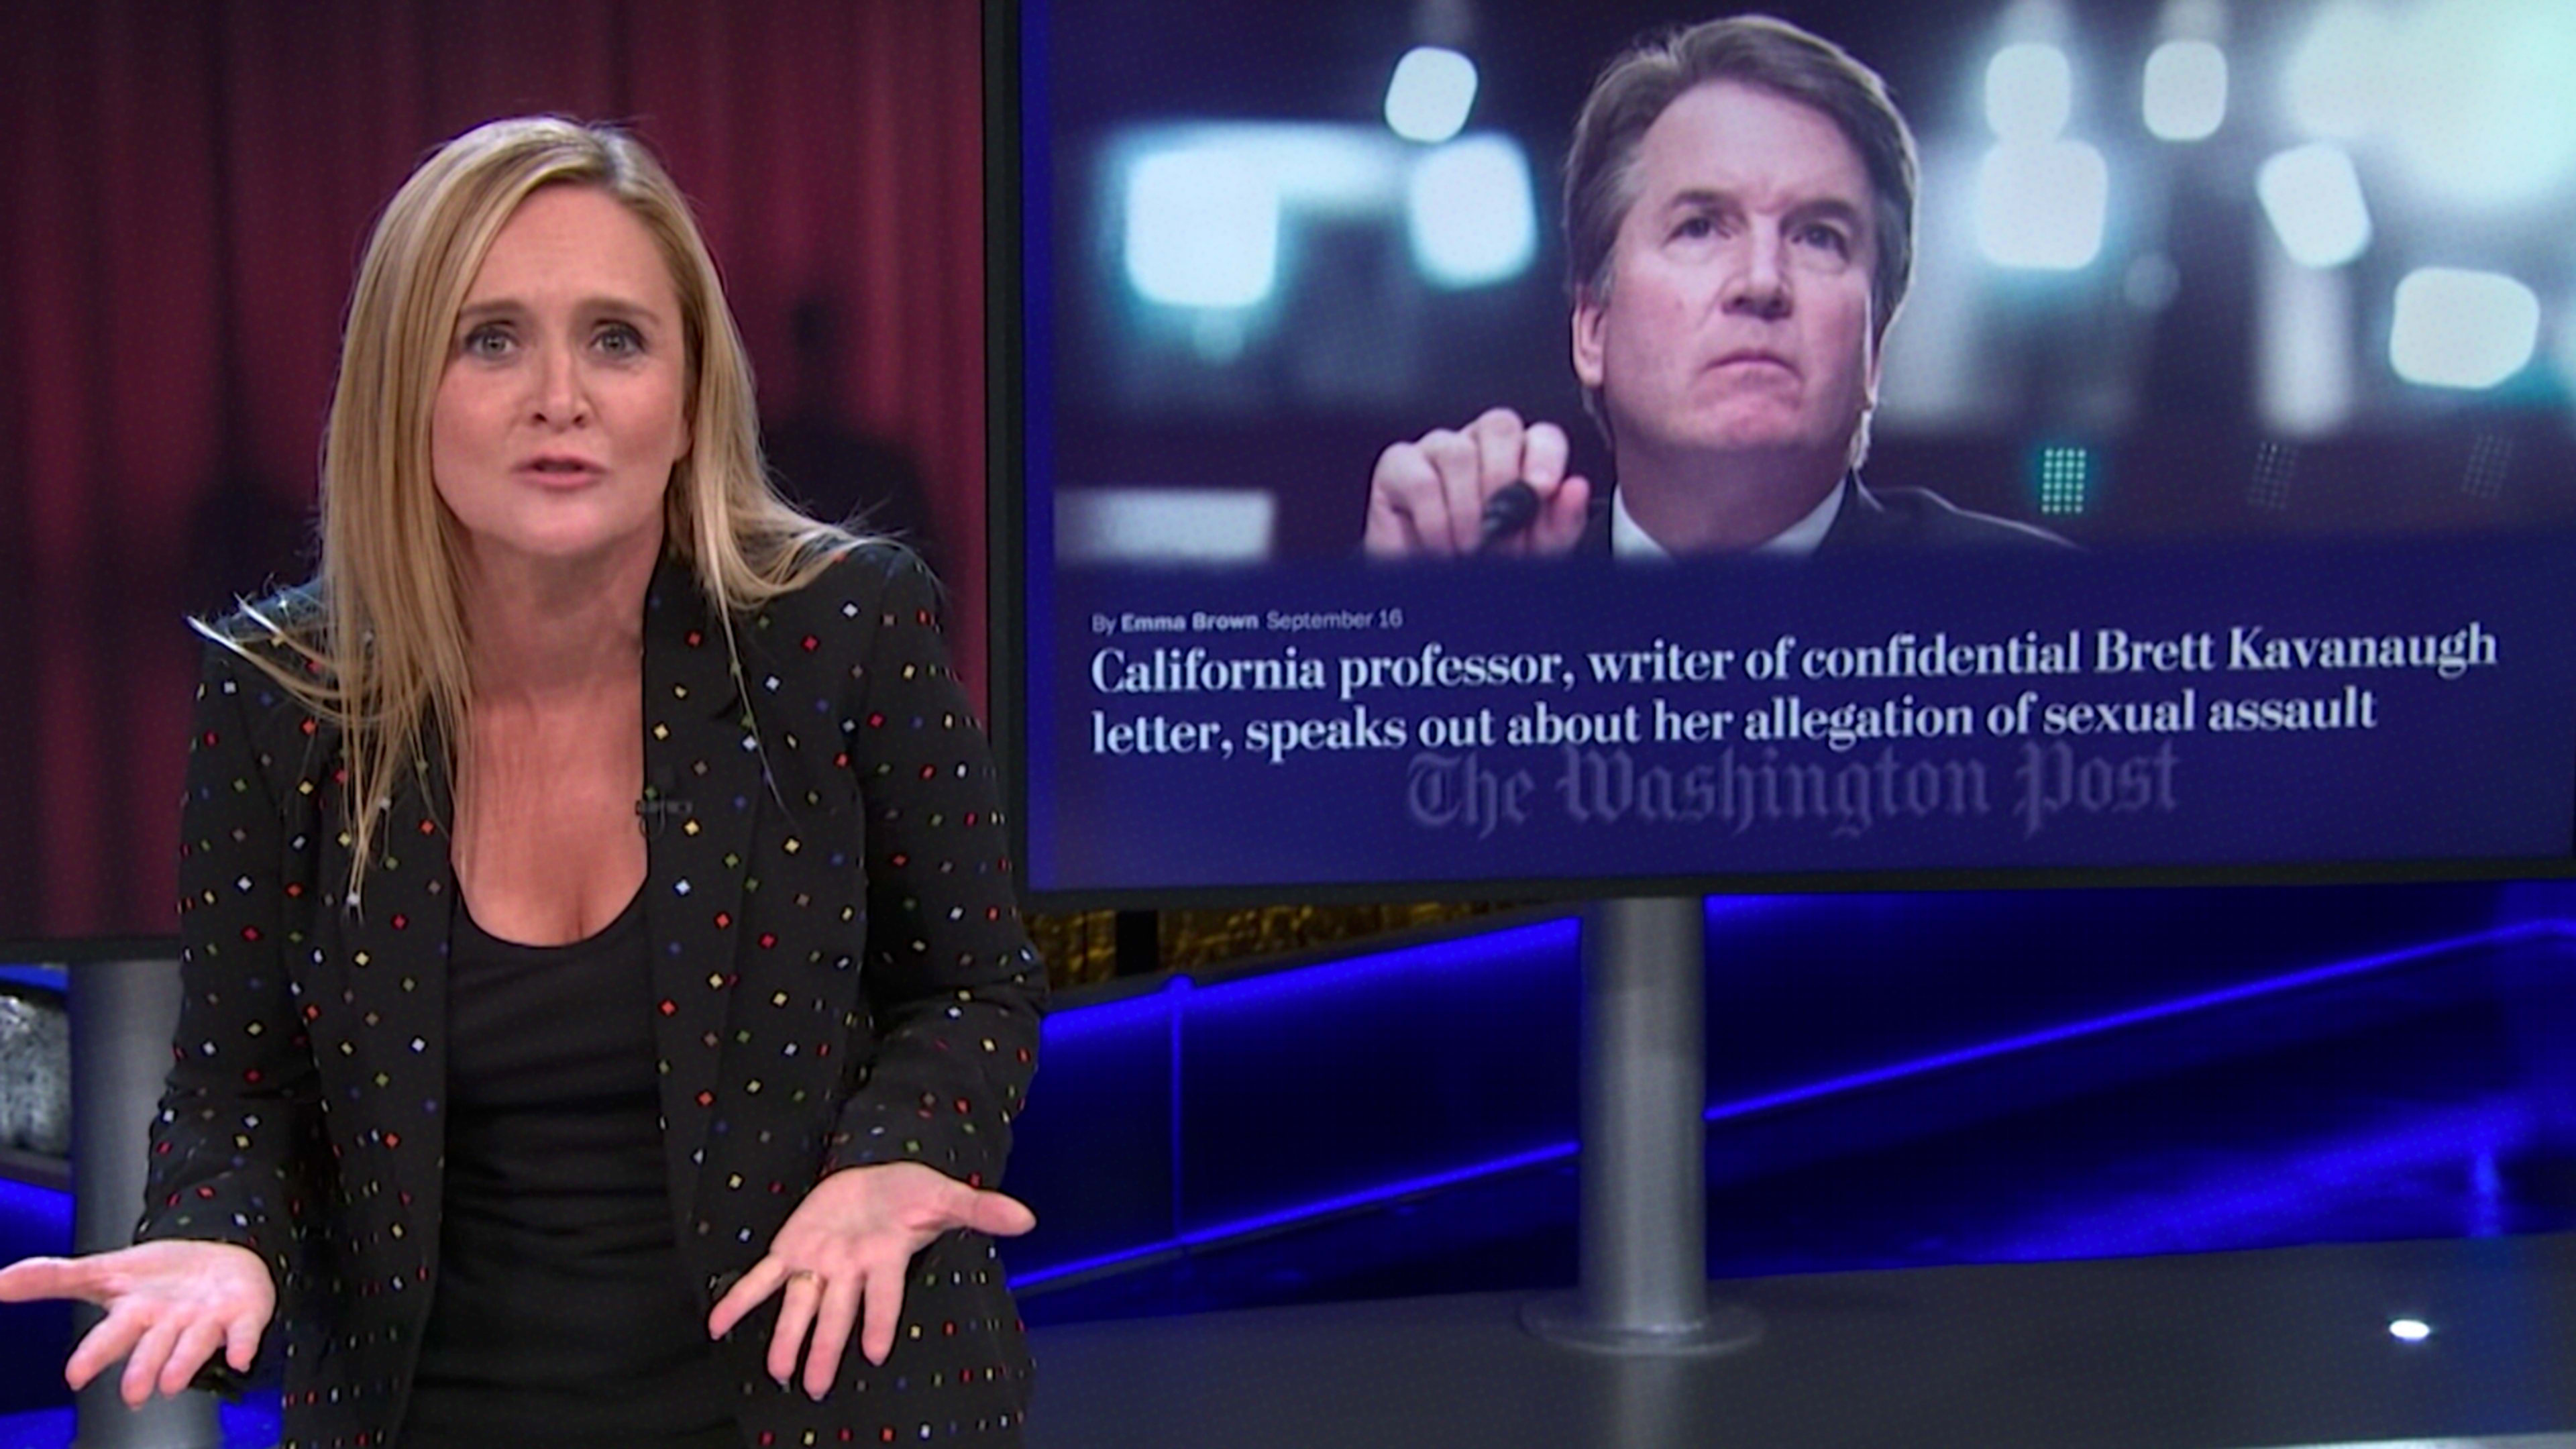 Sam Bee breaks down the ethics of rape, Dr. Seuss-style, so everyone can understand